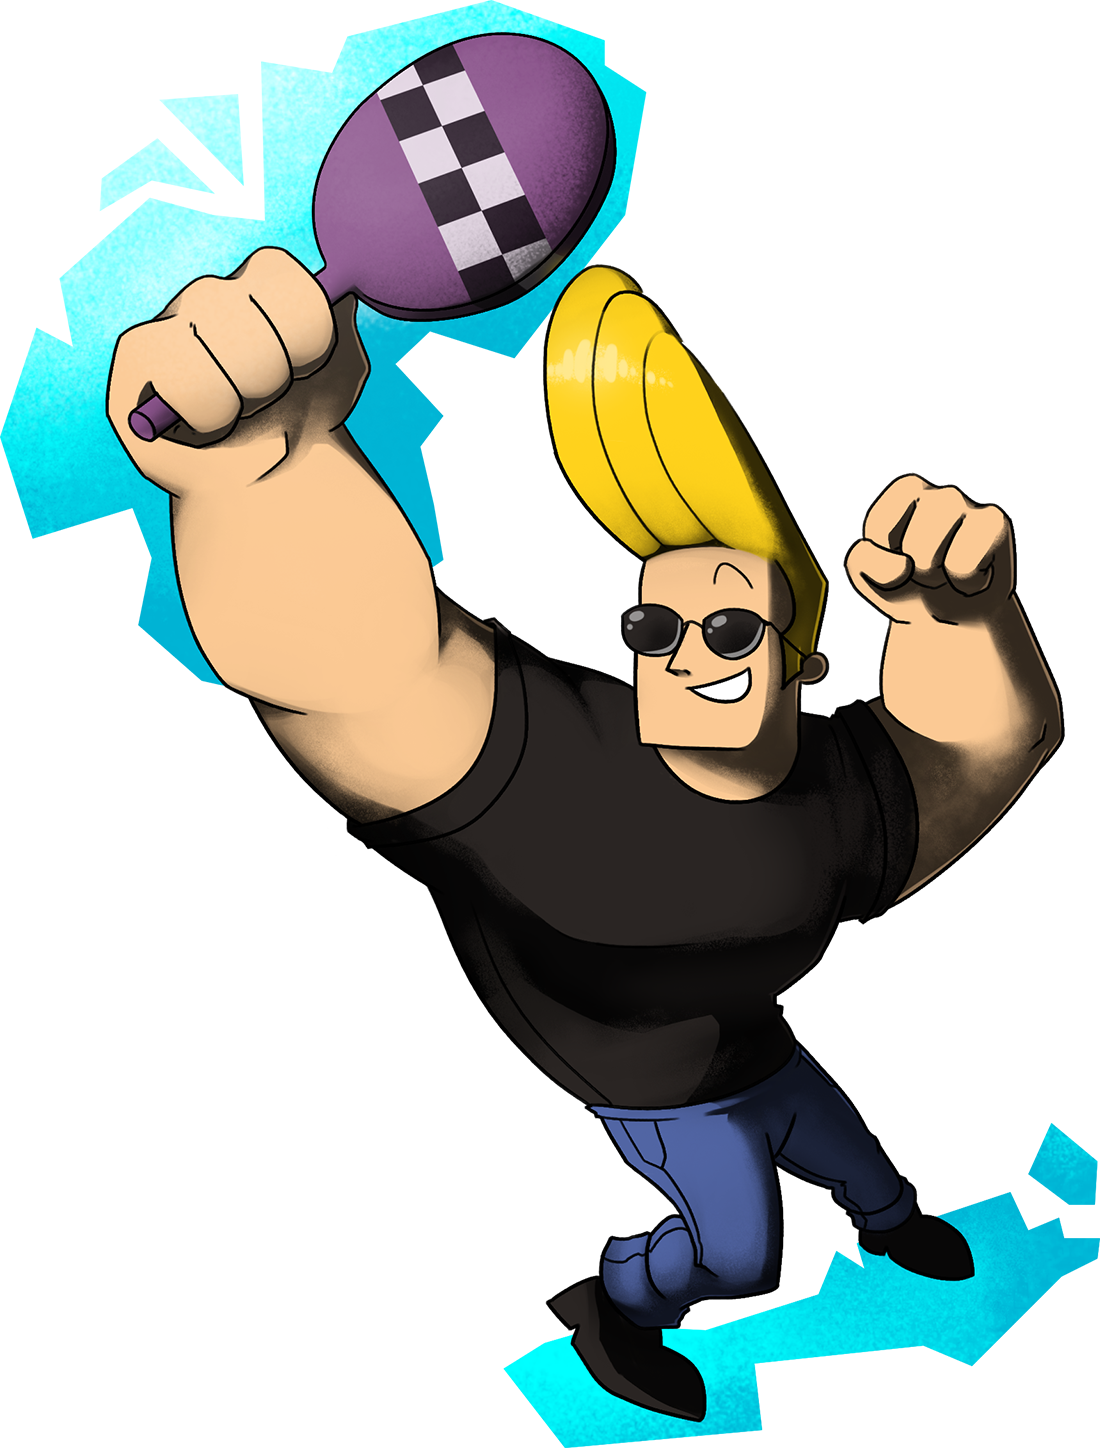 https://static.wikia.nocookie.net/siivagunner/images/c/c2/Johnny-bravo.png/revision/latest?cb=20190624023640